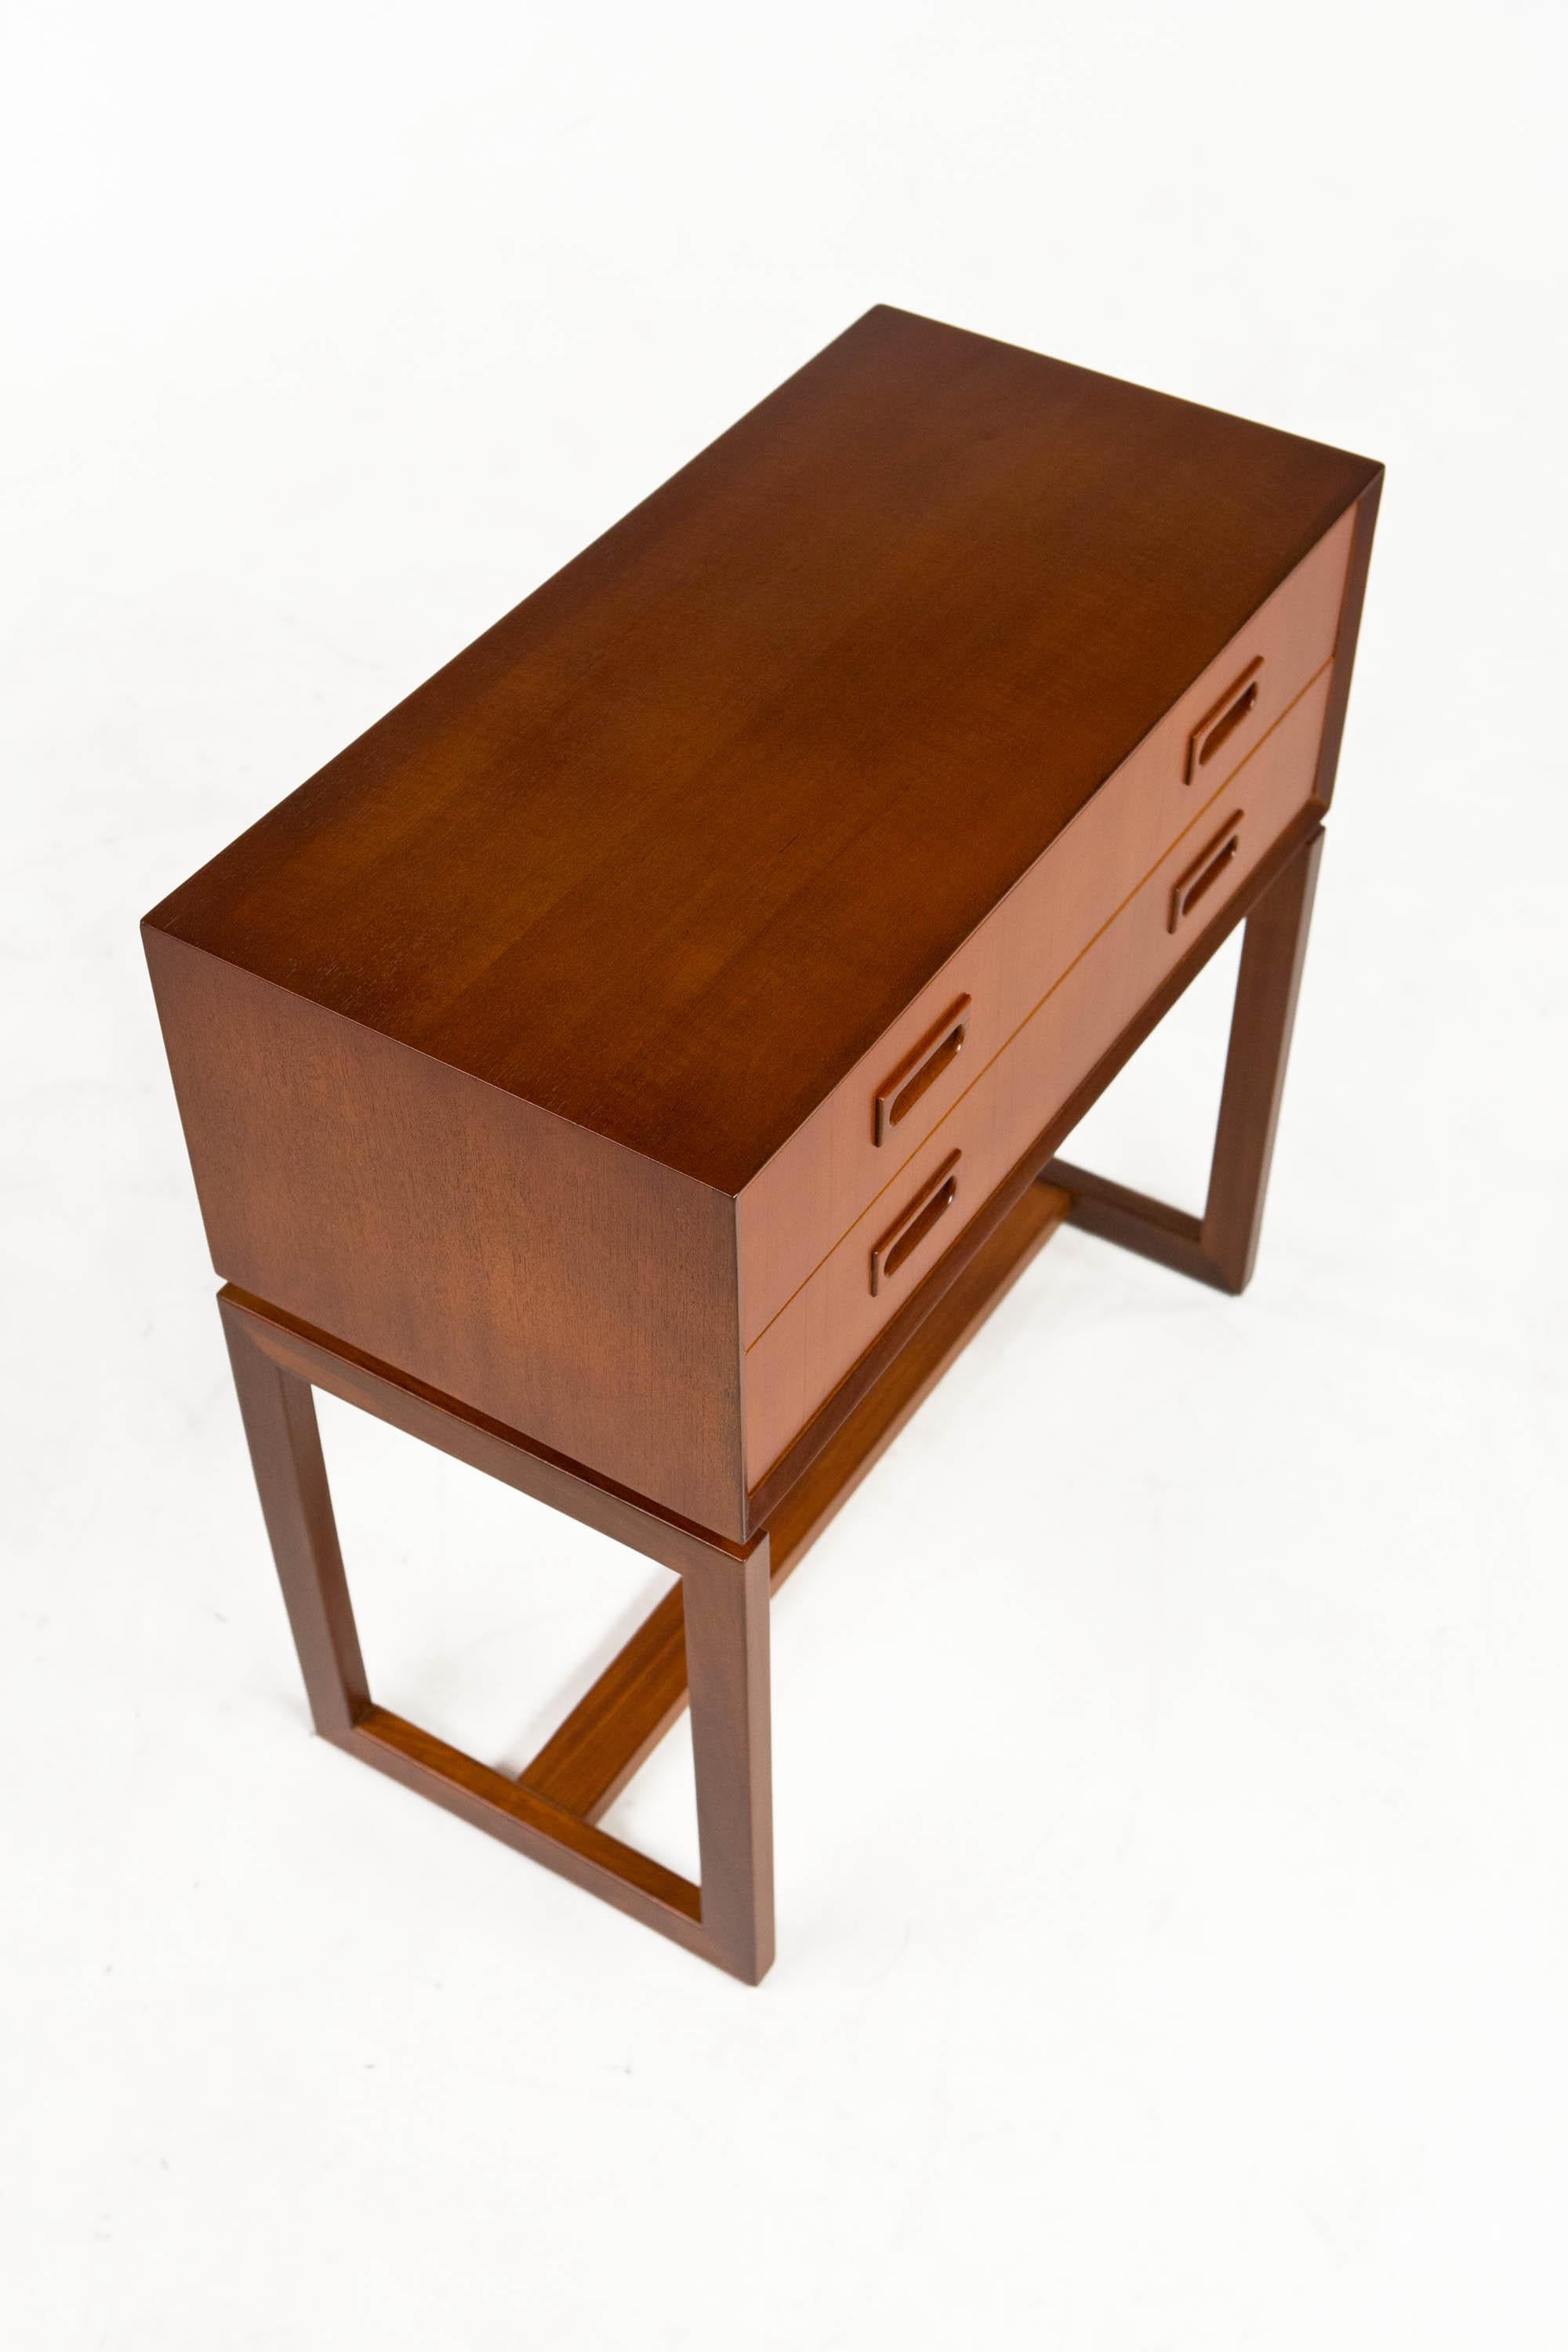 Teak two drawer bureau with Beveled edge - Danish design 1950's

Lovely smaller two drawer teak bureau with beveled edge details and solid carved pulls and clean architectural base.

Fully refinished in great condition.